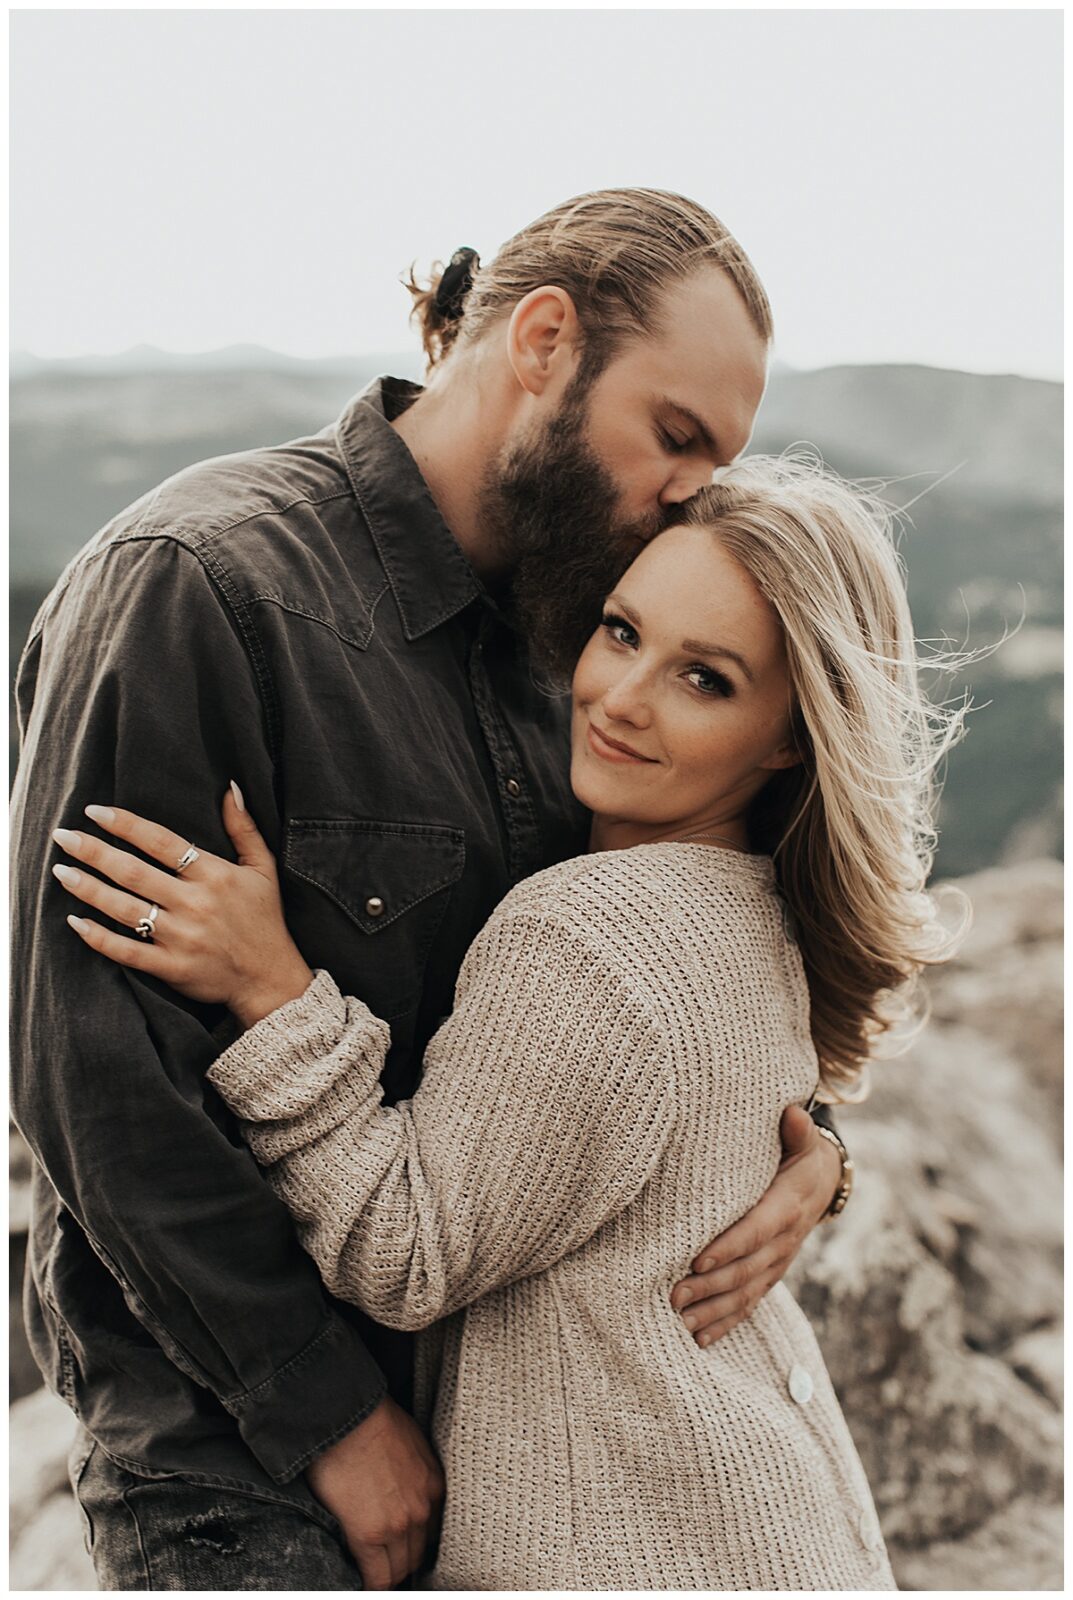 Mountaintop dreamy boho engagement session.